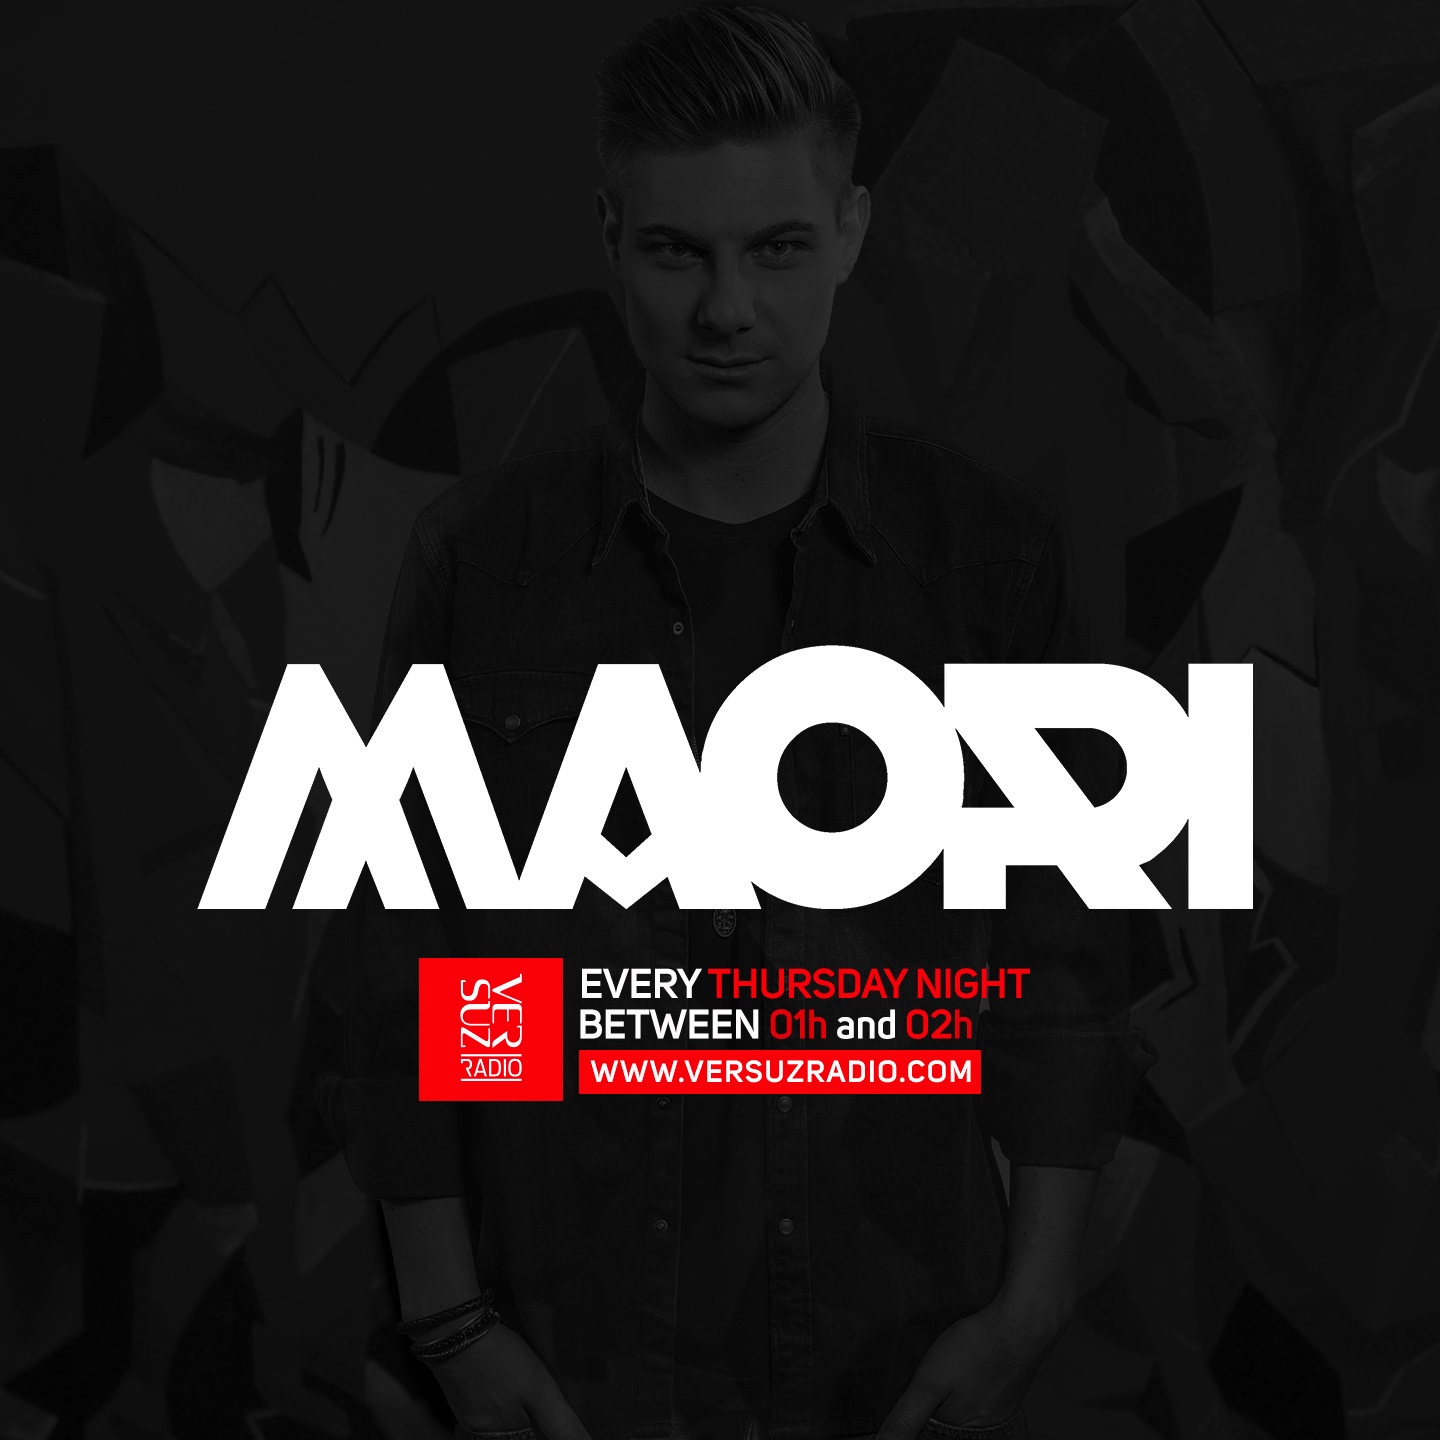 Clubhouse Radio by Maori - Episode #003